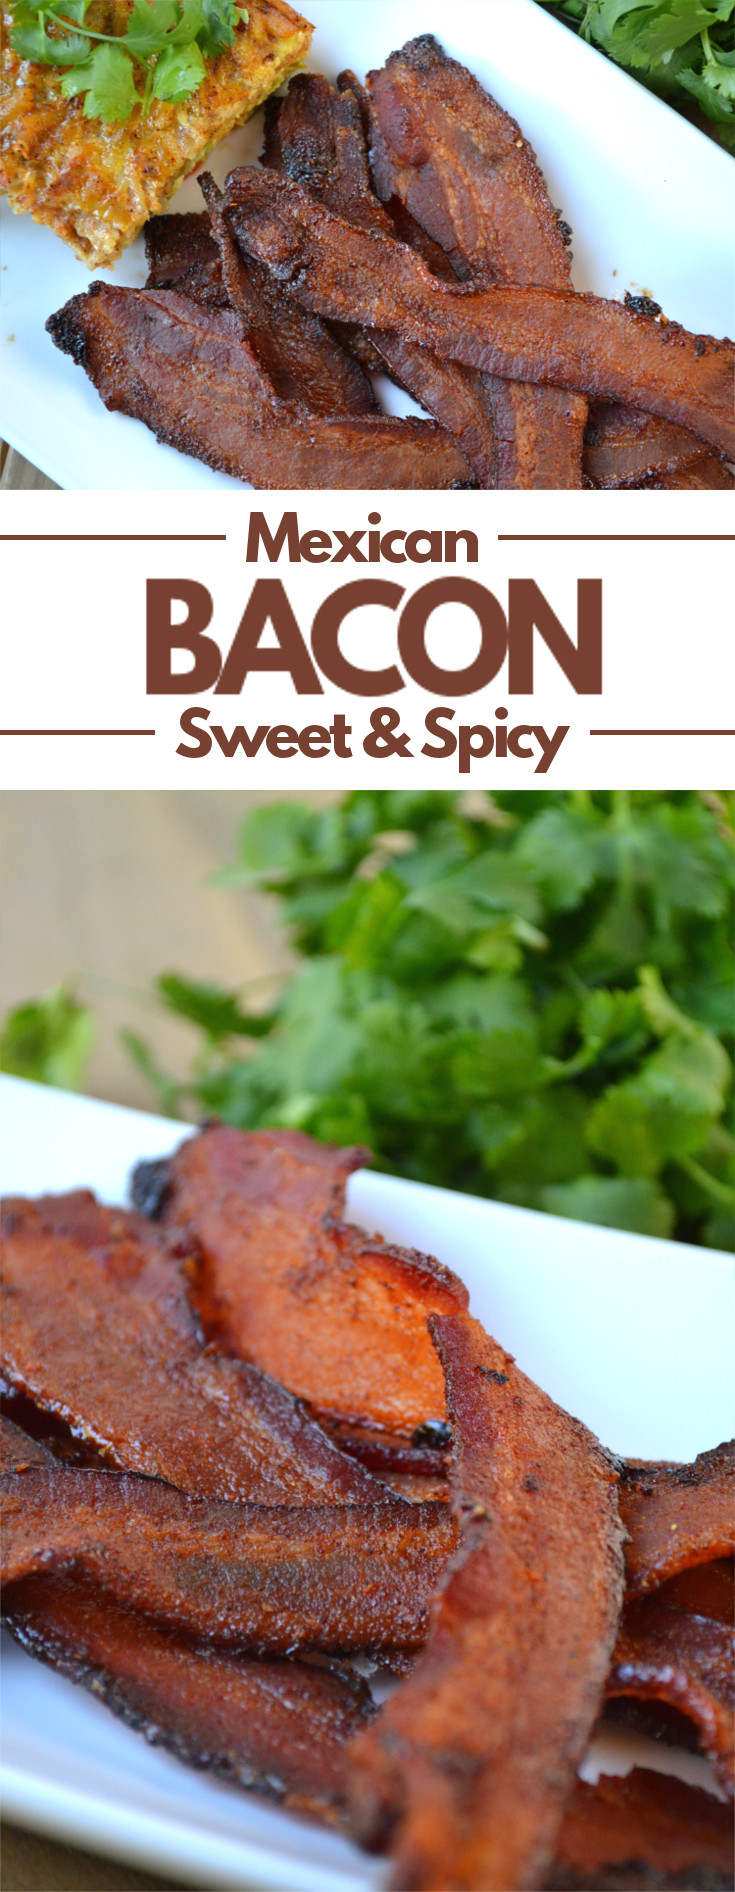 Simple Spicy Mexican Style Bacon Recipe - Thick smokey bacon flavored with a spicy and slightly sweet coating then cooked to crispy perfection in the oven.